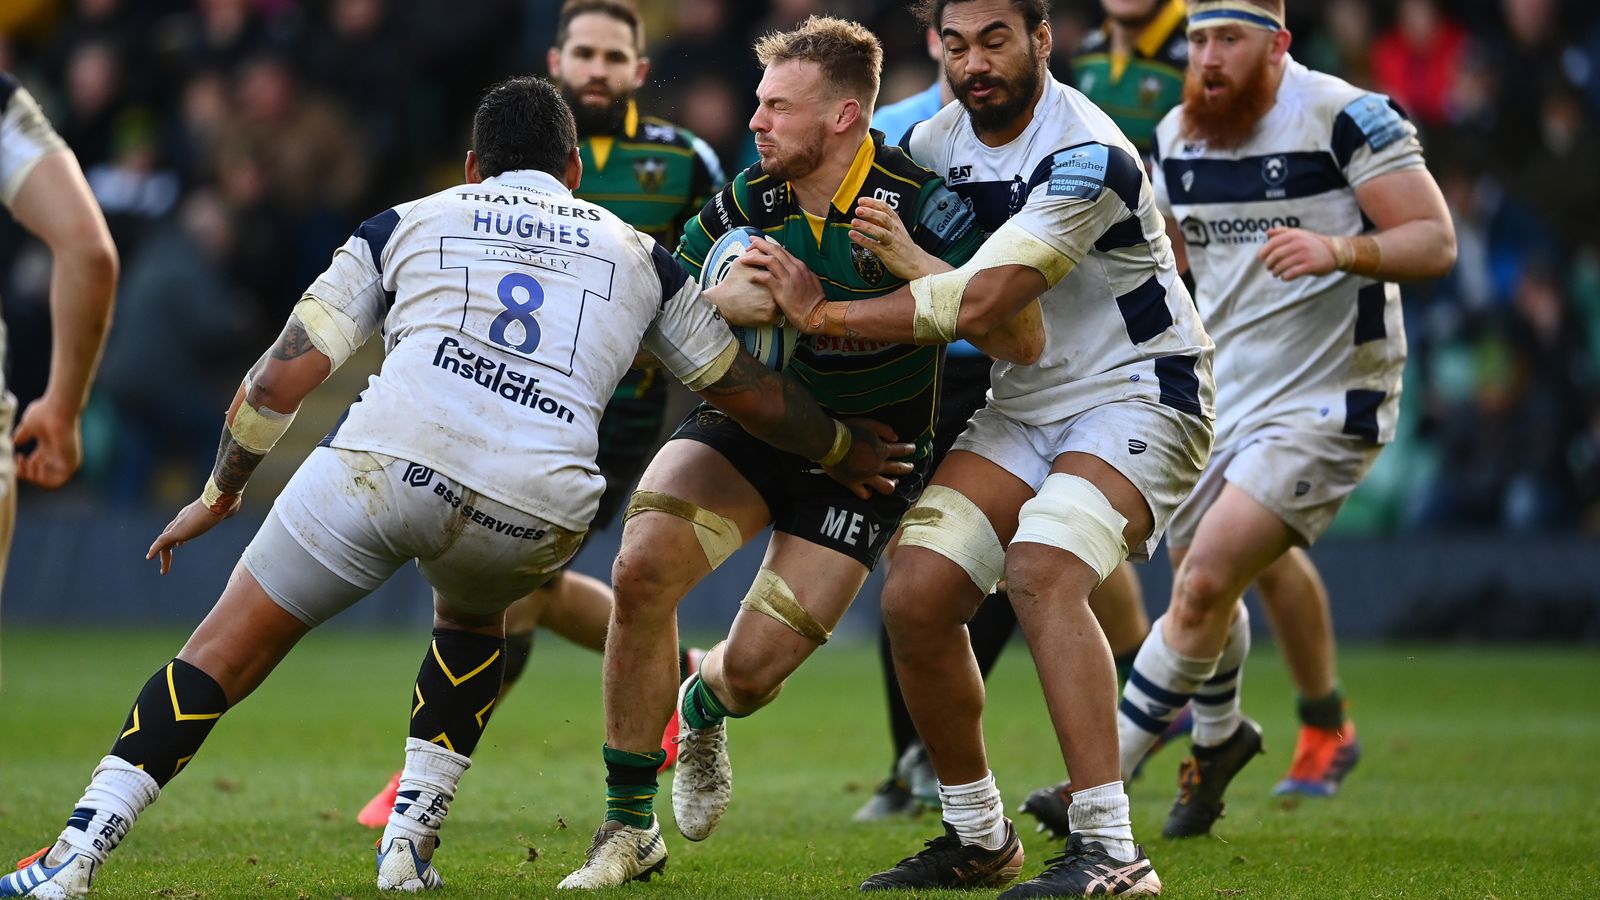 Rugby Premiership clubs agree to cut salary cap by £1m